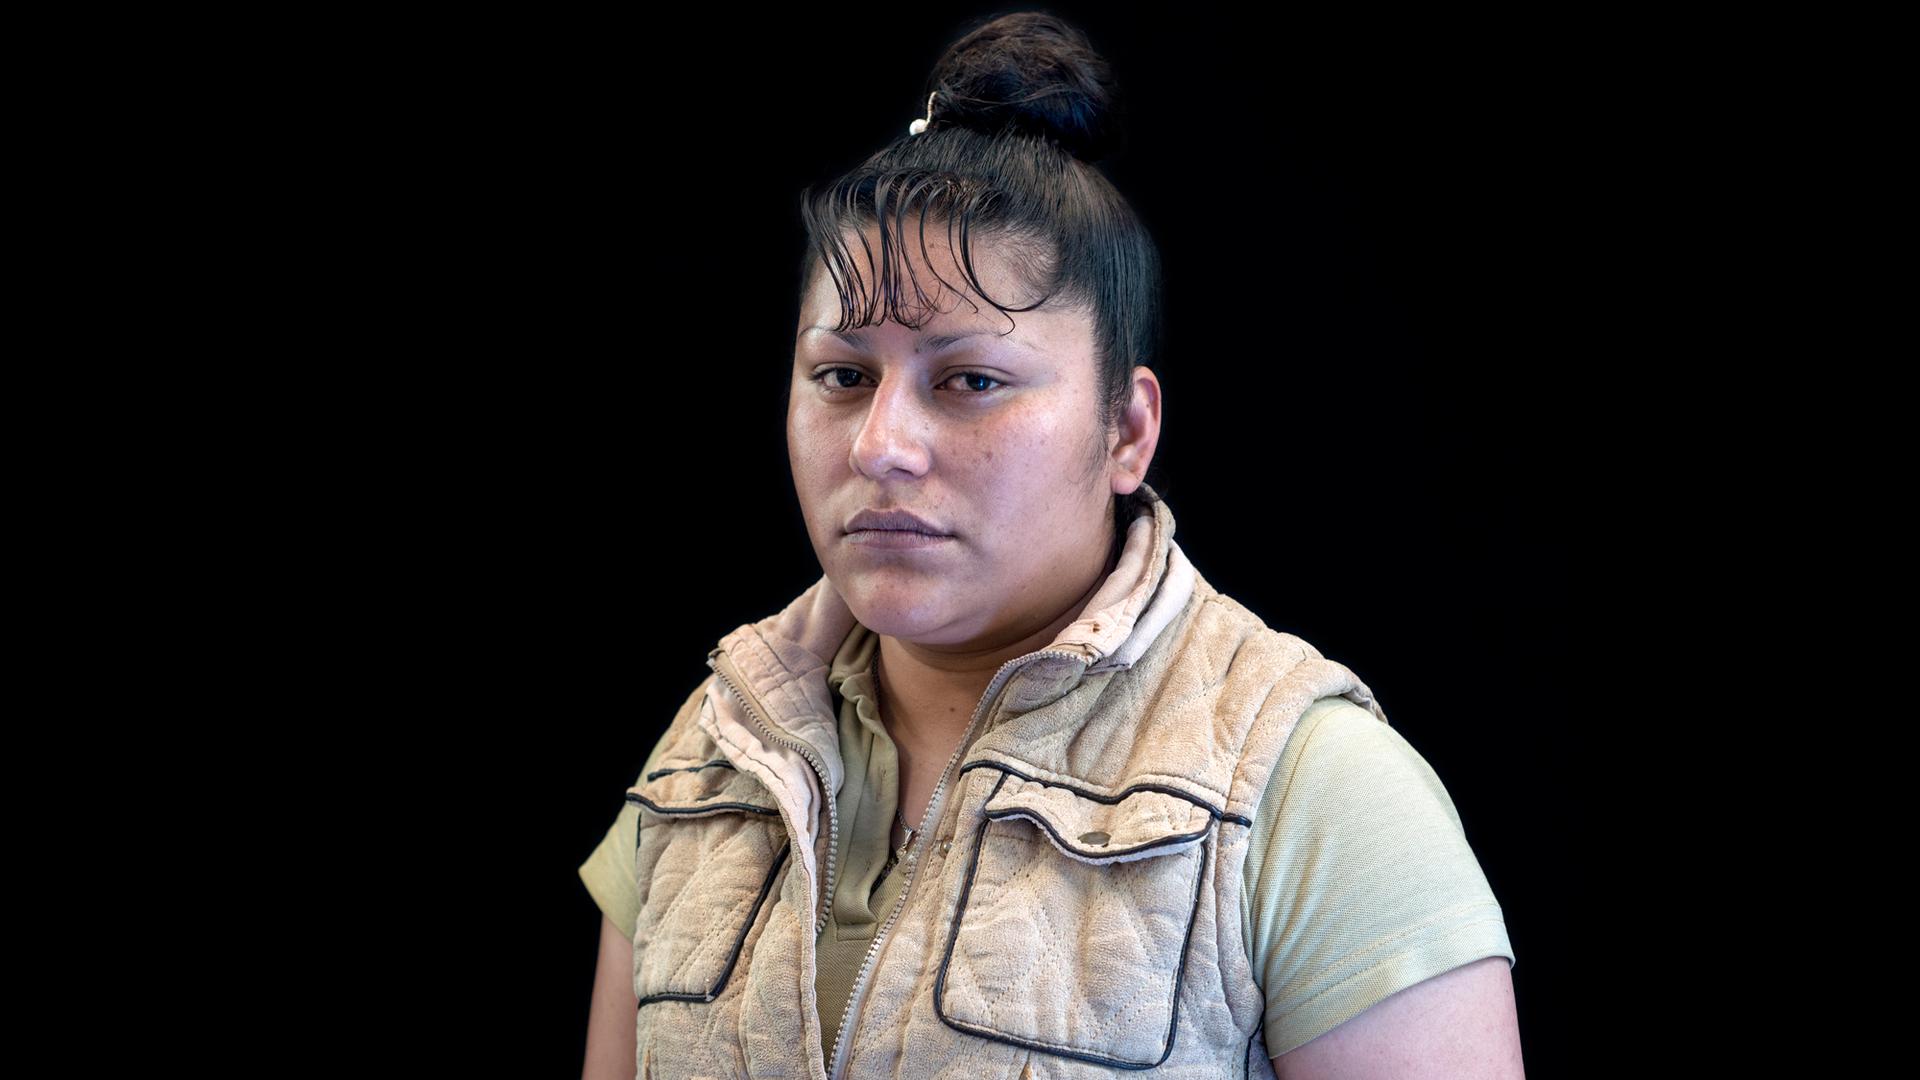 A portrait of inmate Carmela Rodriguez Reyes in Mexico.